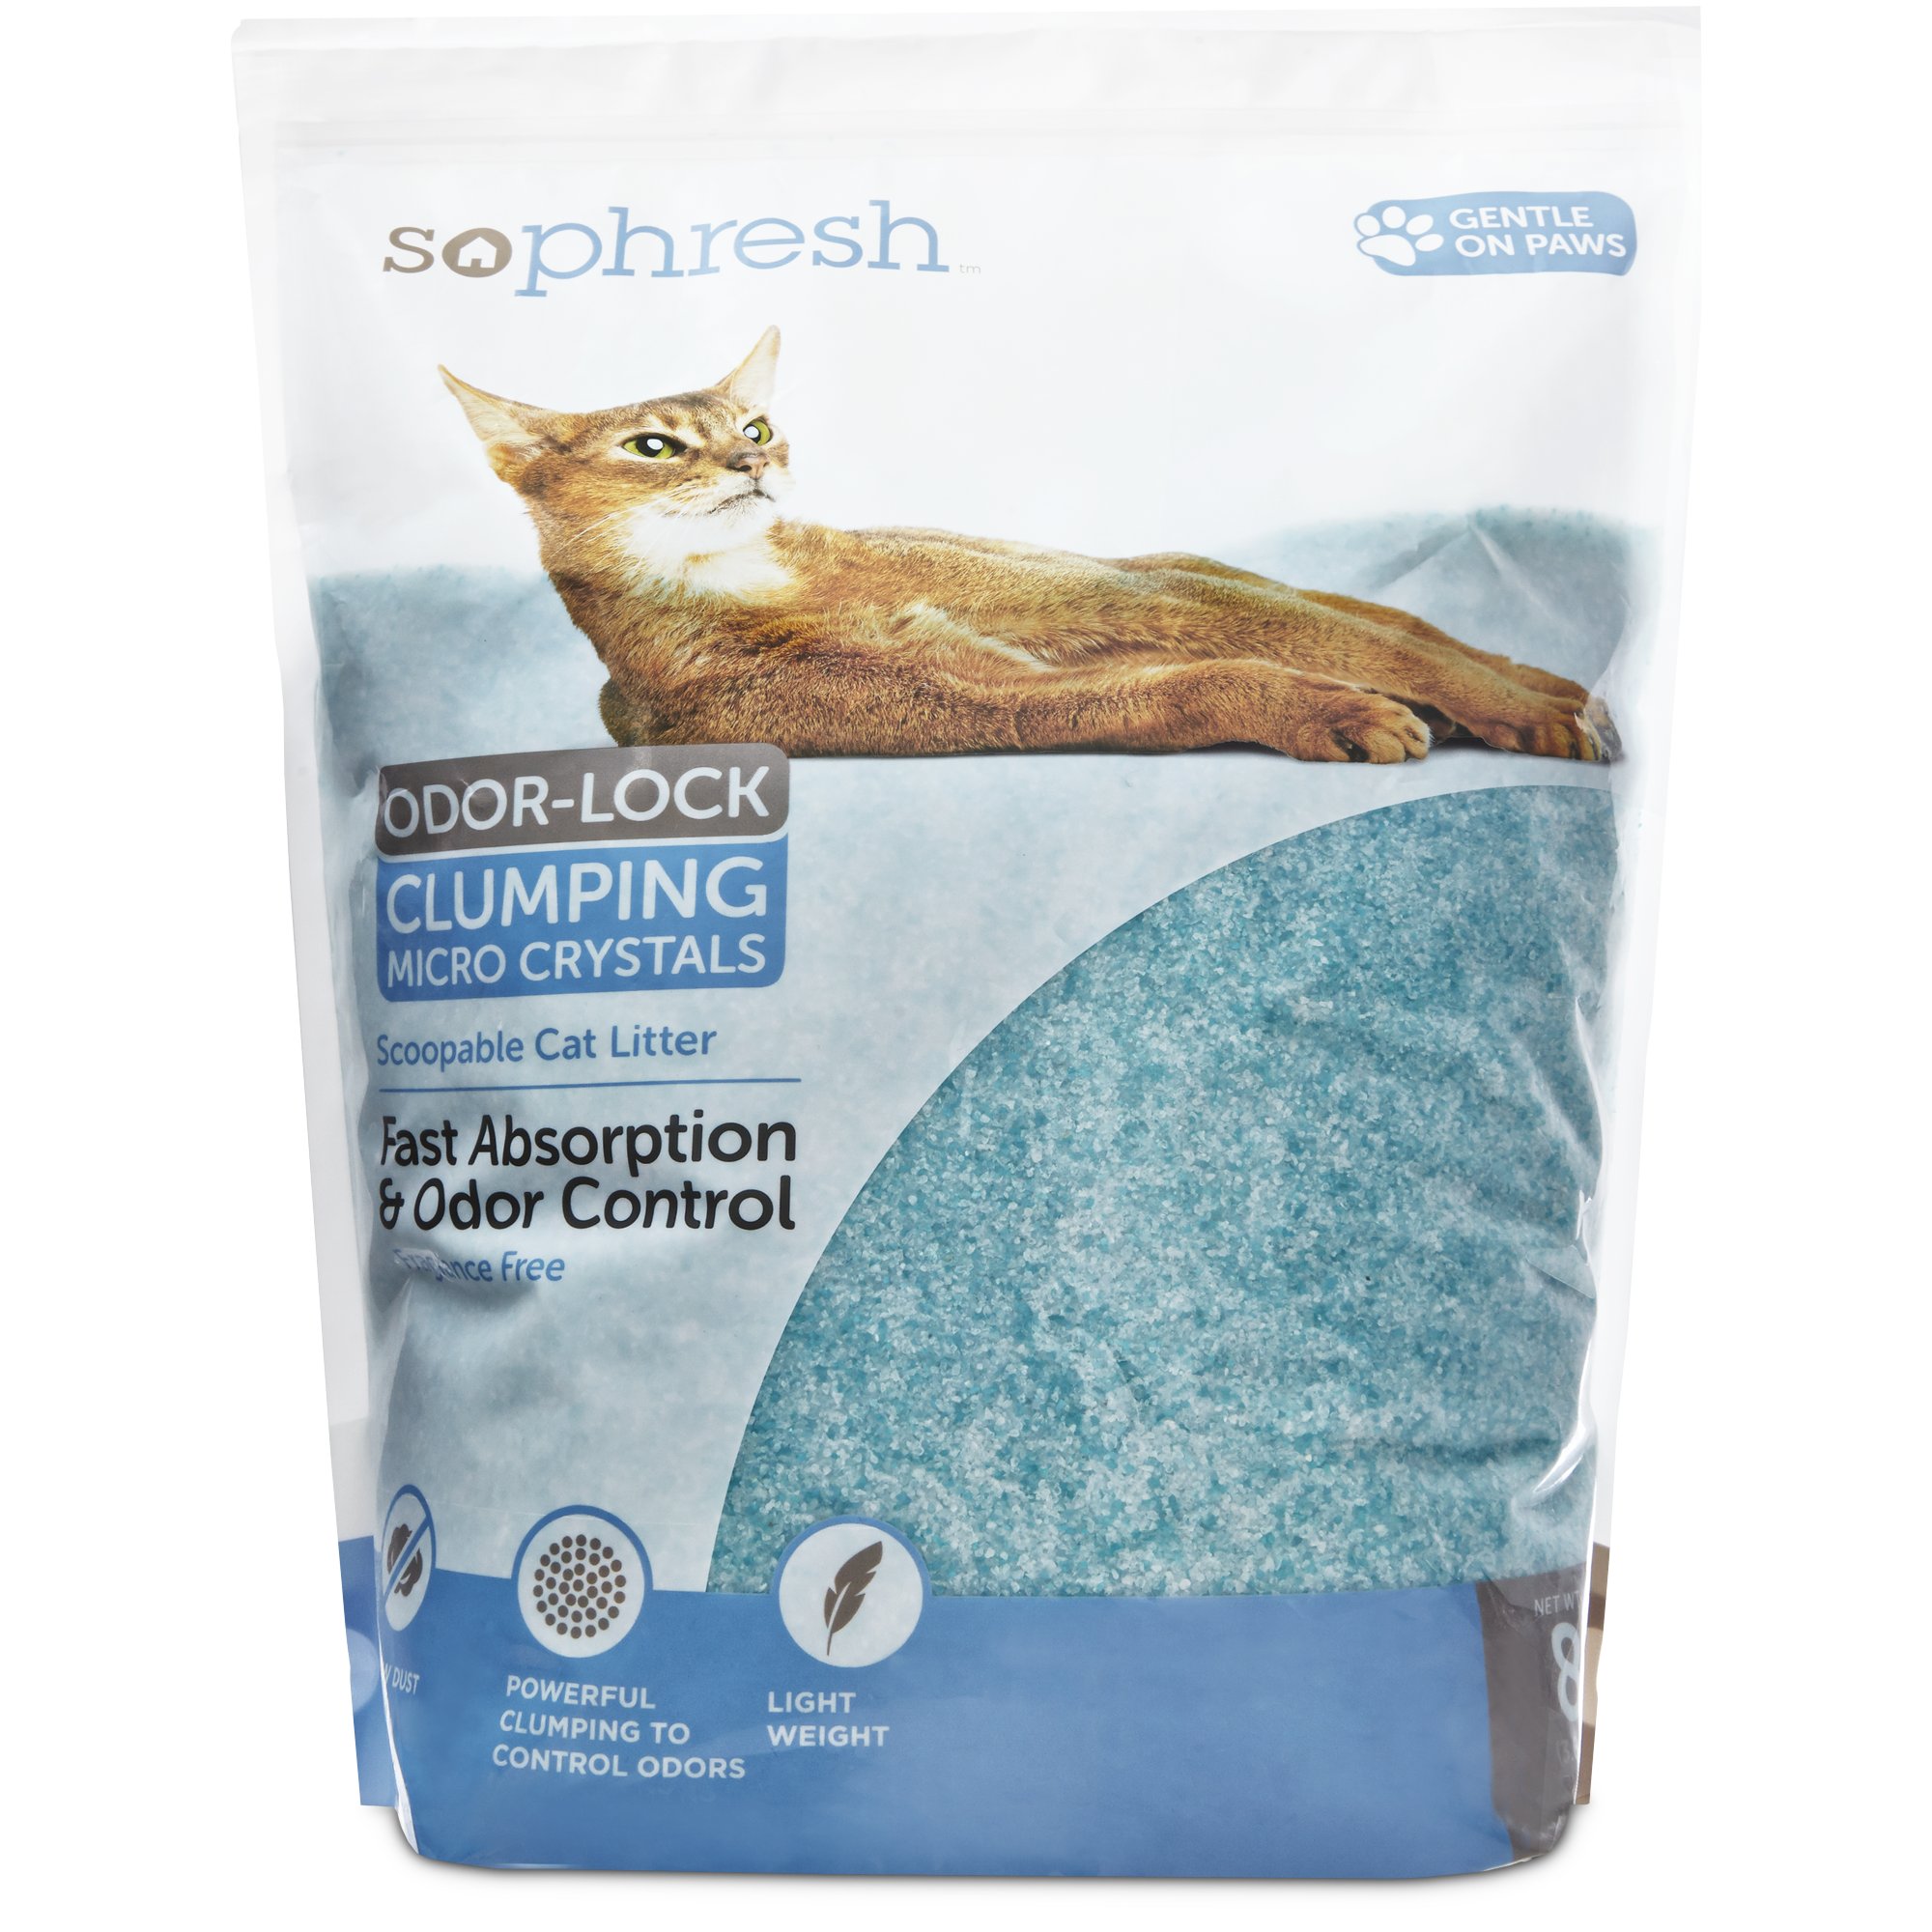 So Phresh Scoopable OdorLock Clumping Micro Crystal Cat Litter in